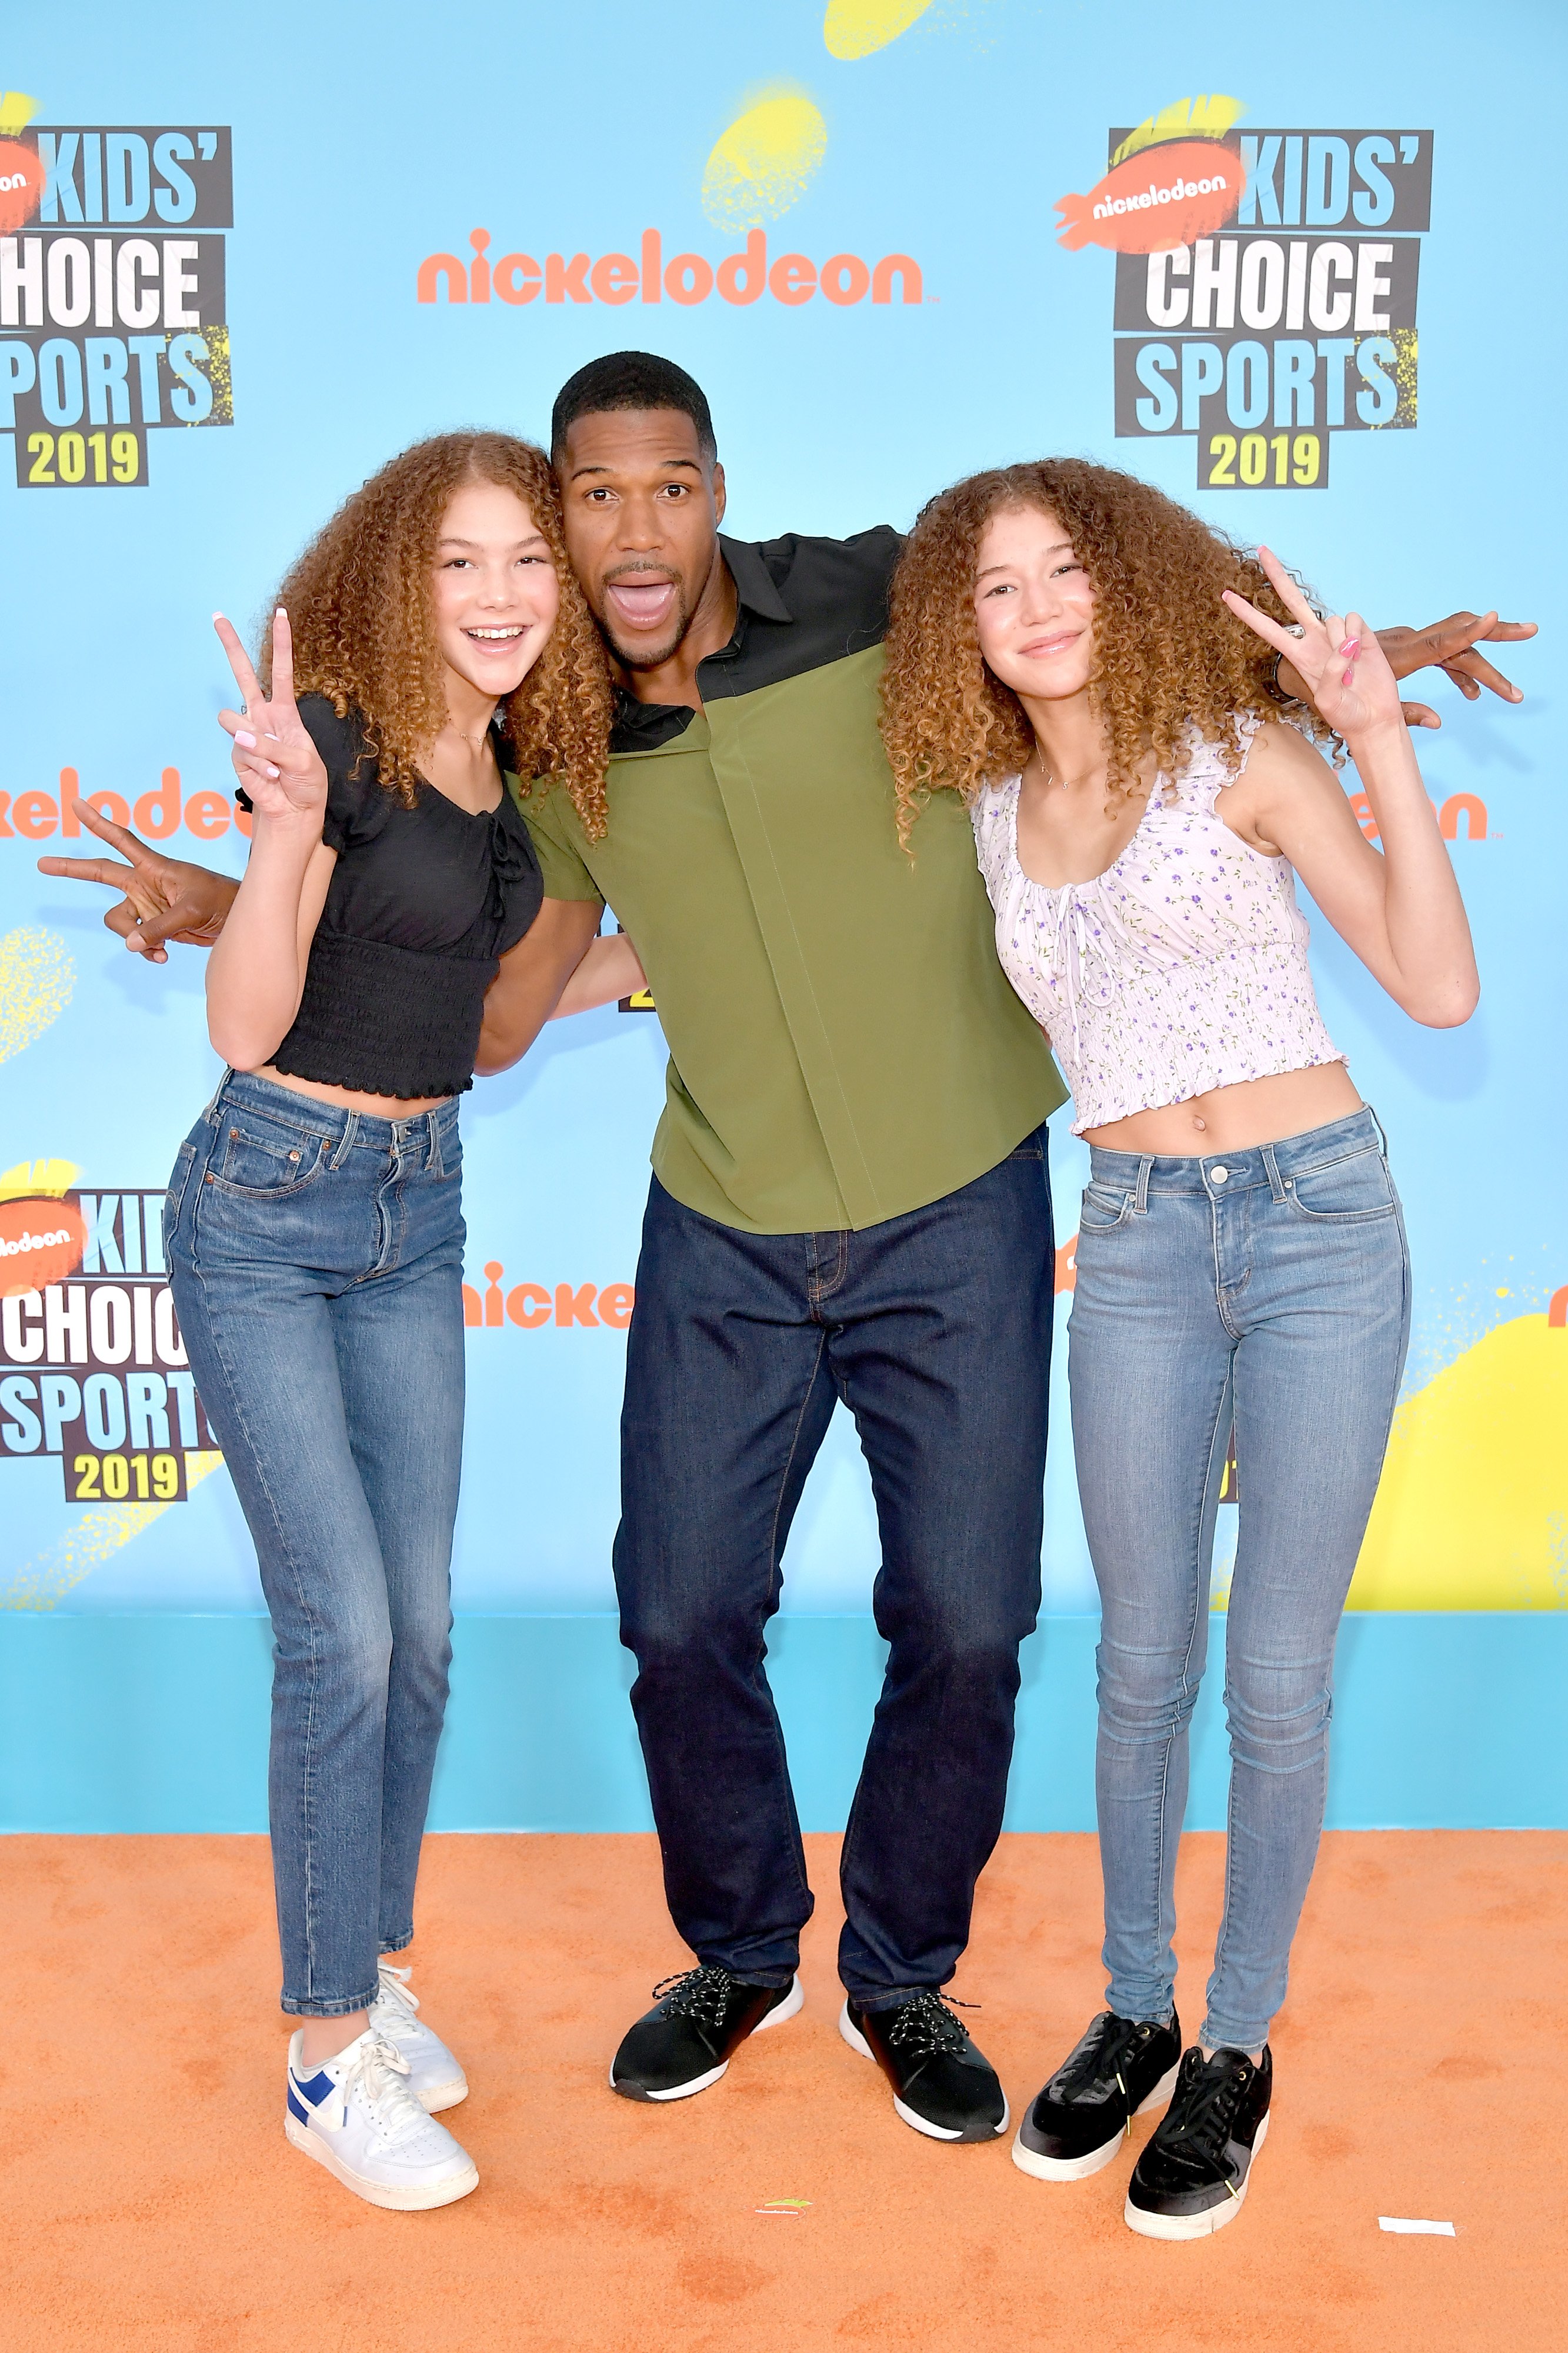 Isabella Strahan, Michael Strahan, and Sophia Strahan at the Nickelodeon Kids' Choice Sports 2019 on July 11, 2019 in Santa Monica, California. | Source: Getty Images